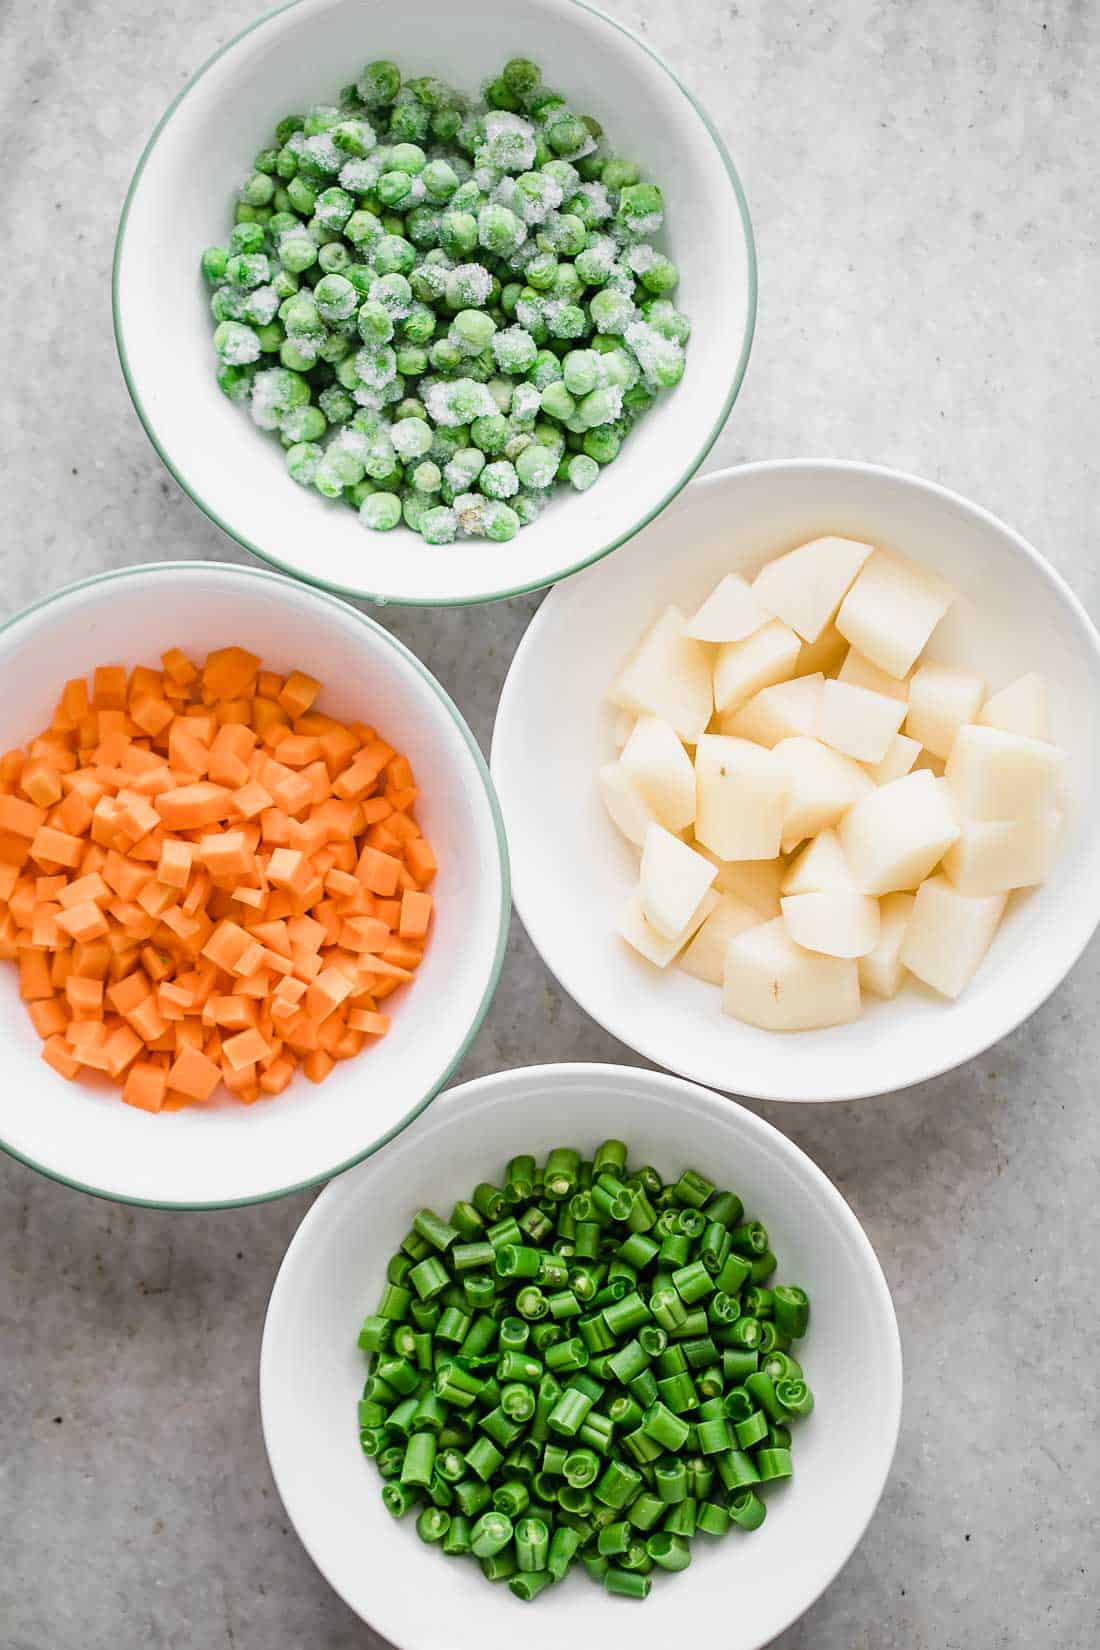 Mise en place for pressure cooker veg pulao. Pcture of frozen green peas, carrots, beans and potatoes n bowls all ready to go into the recipe